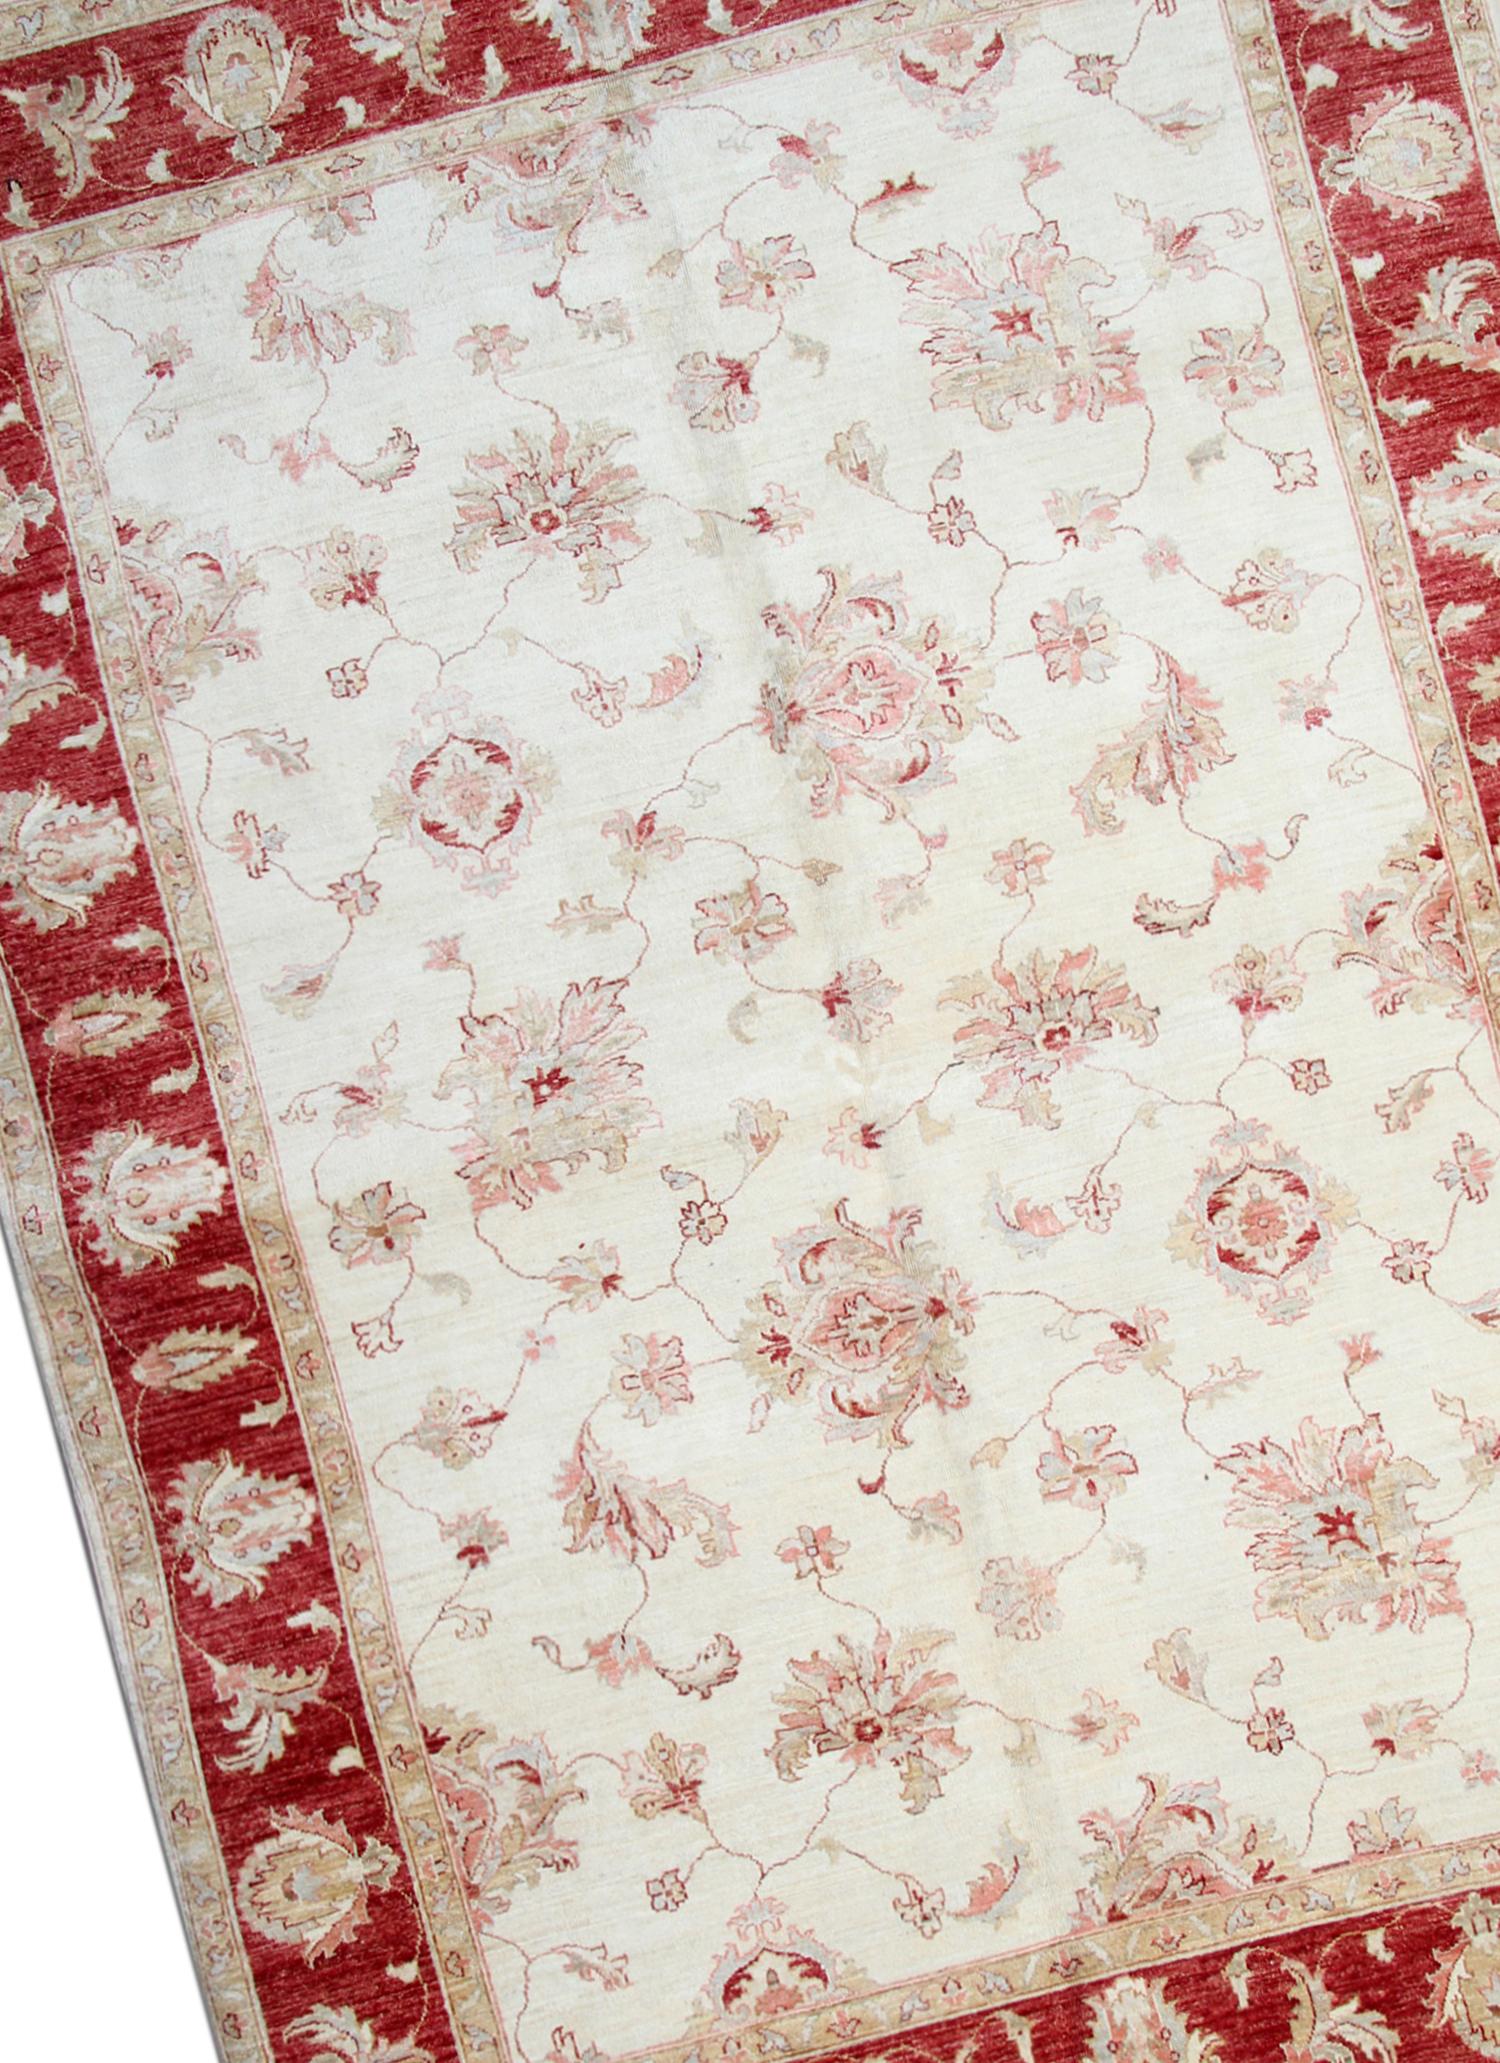 This rug is a Ziegler Sultanabad rug made on our looms by our master weavers in Afghanistan. It is handmade with all-natural veg dyes all hand-spun wool. The large-scale design makes Sultanabad regarded as the most appealing to European and American